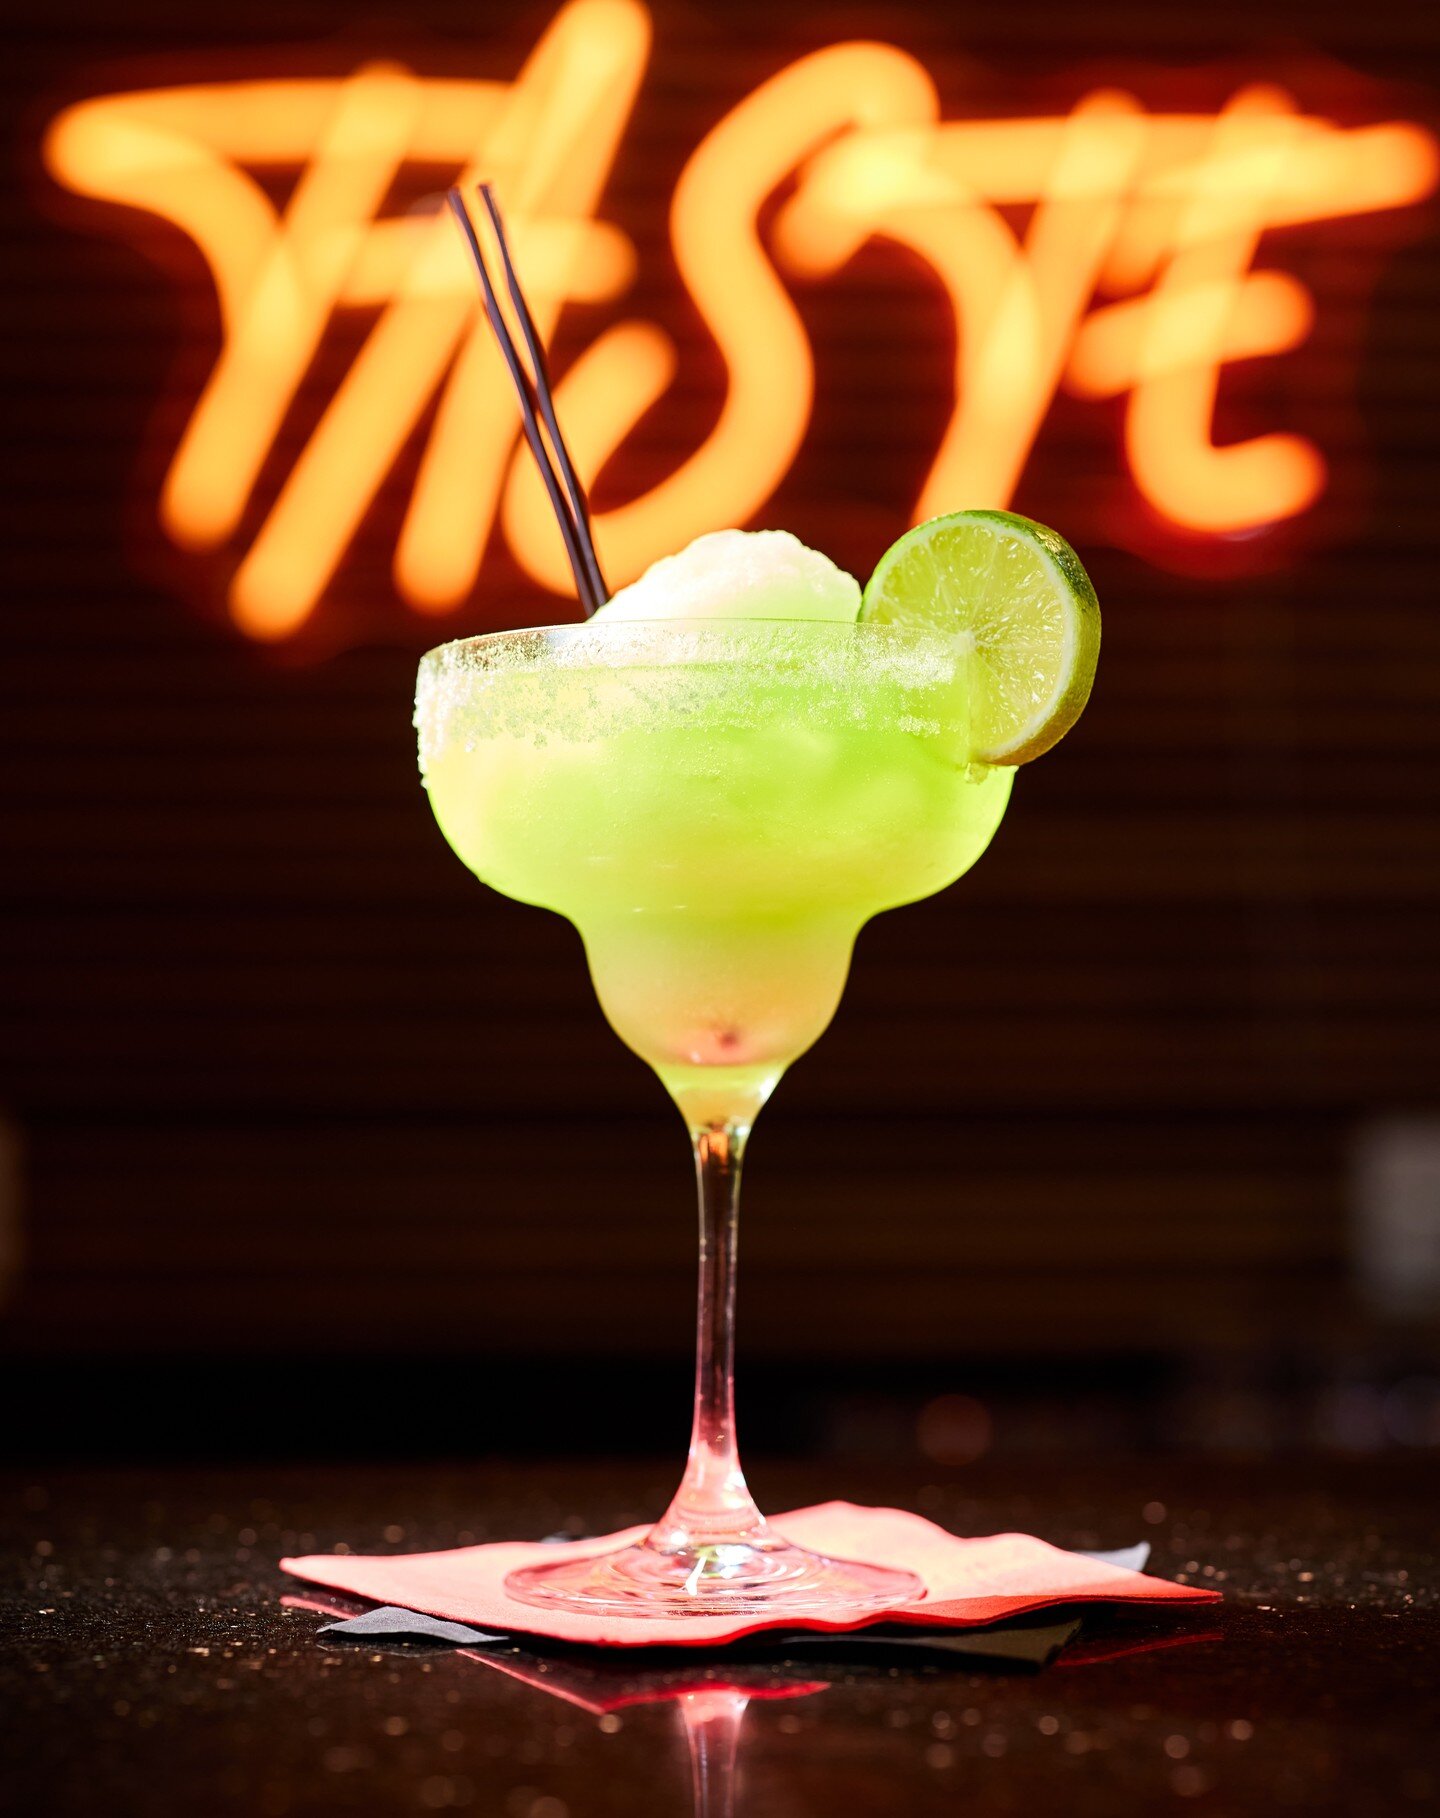 Sugar rim, lime wedge, and a whole lot of zest! 🍸🌵